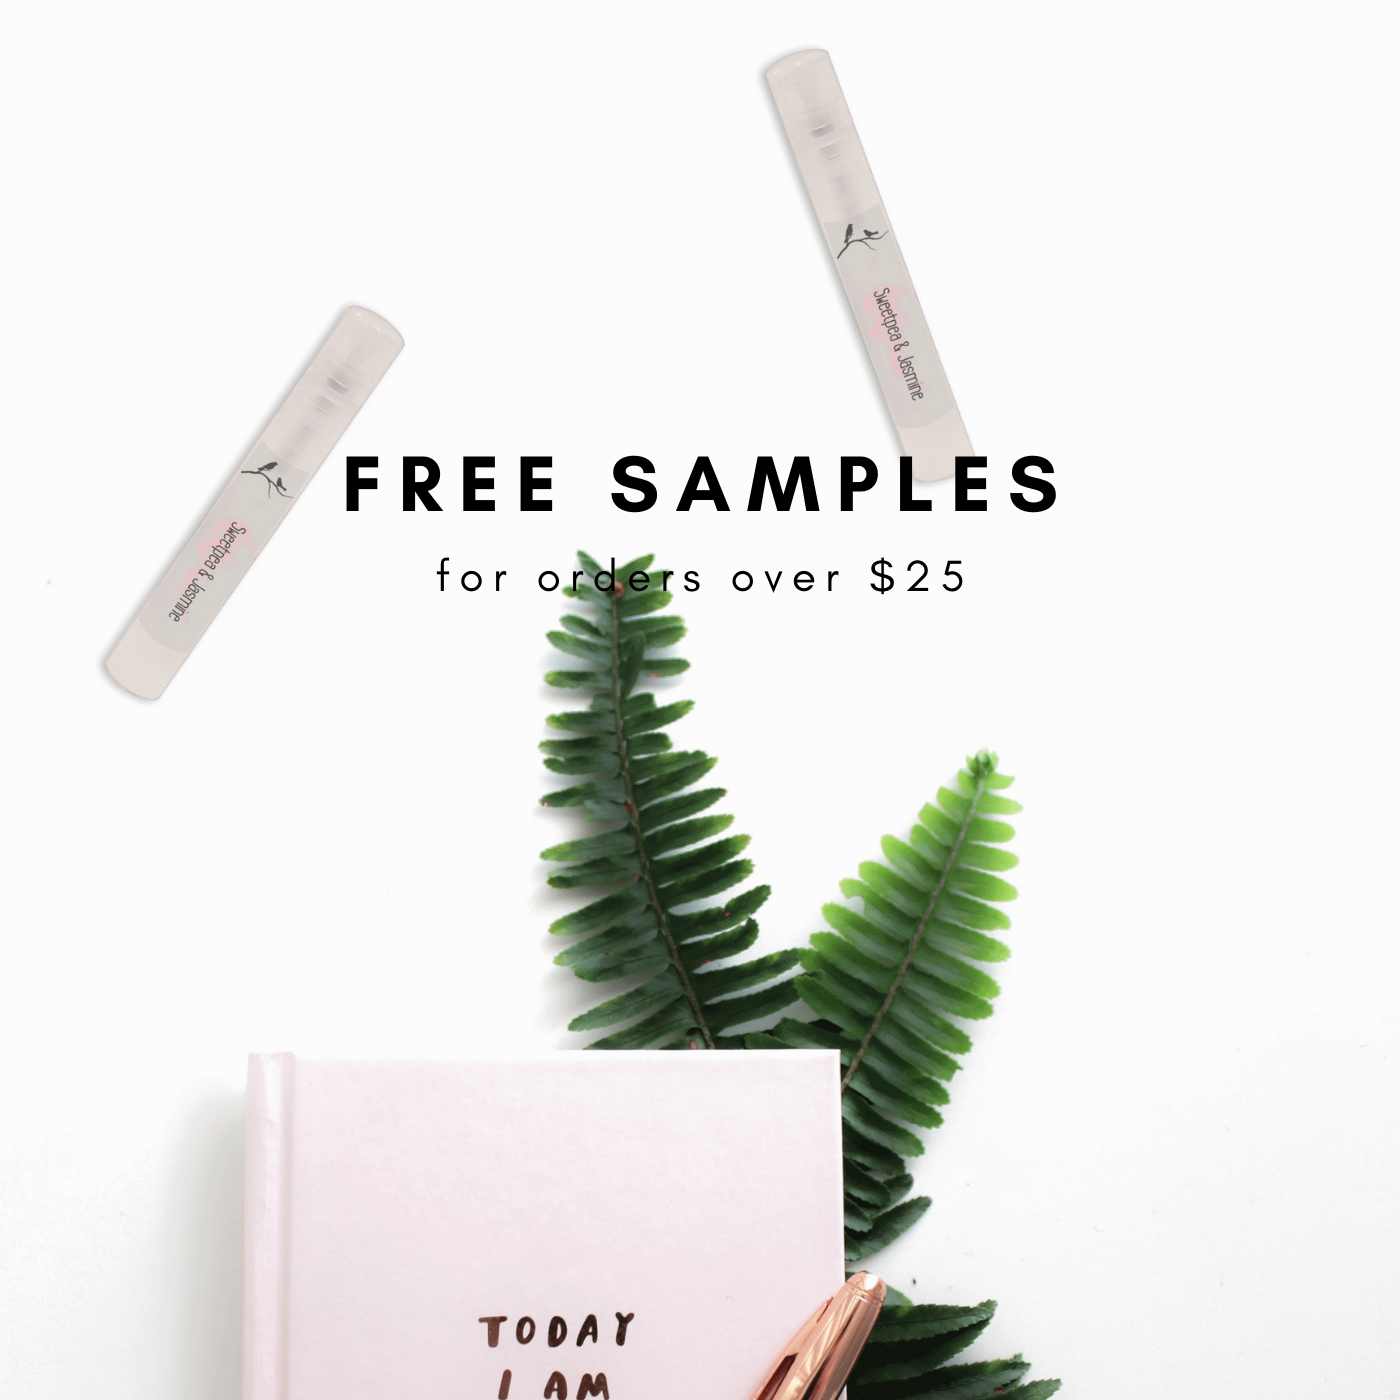 Discover Free Samples